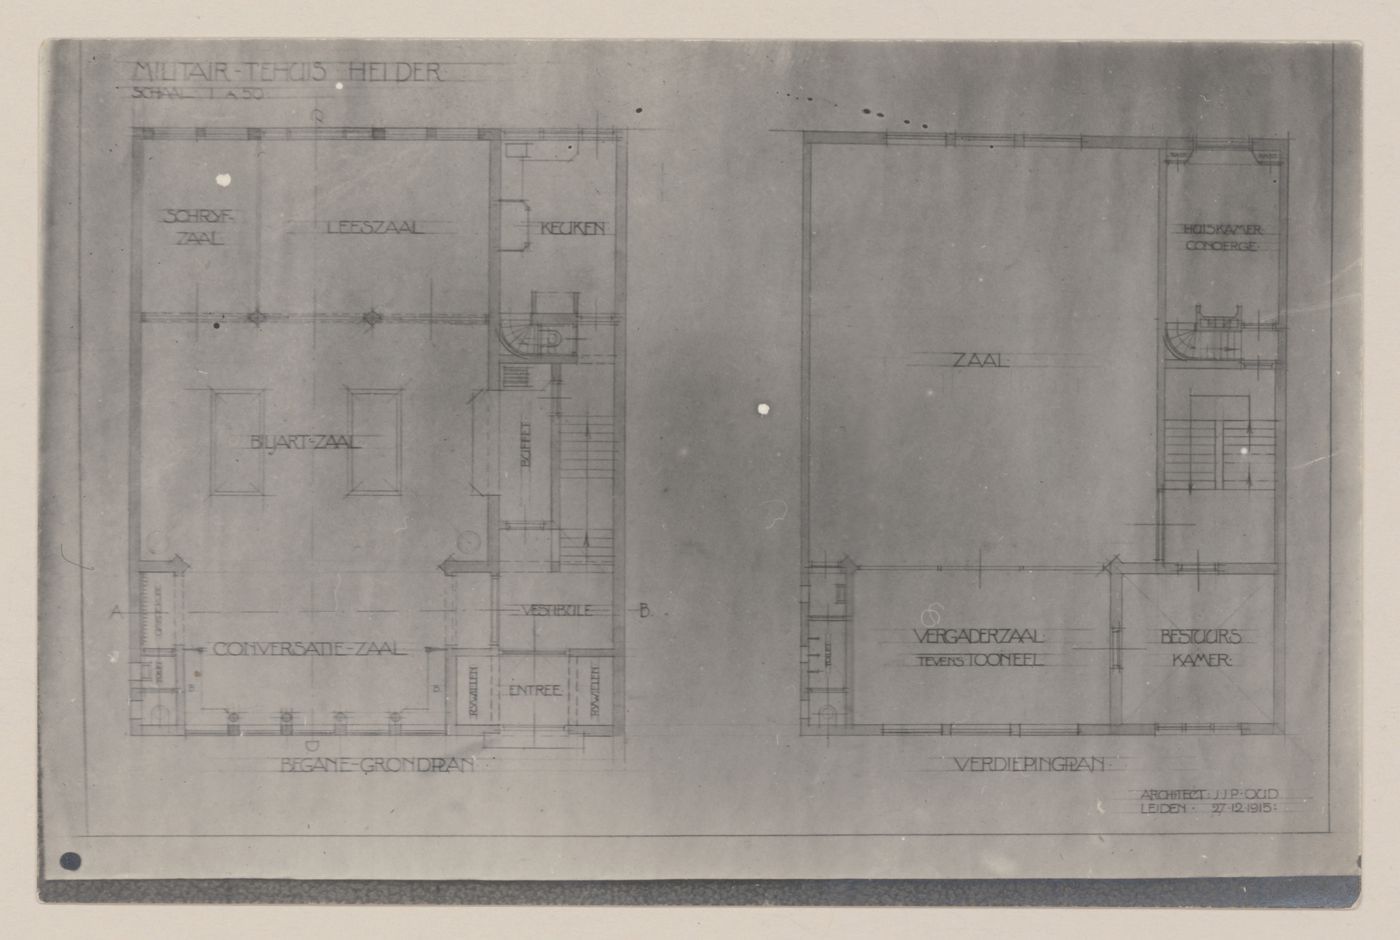 Photograph of floor plans for a convalescent hospital for soldiers, Den Helder, Netherlands